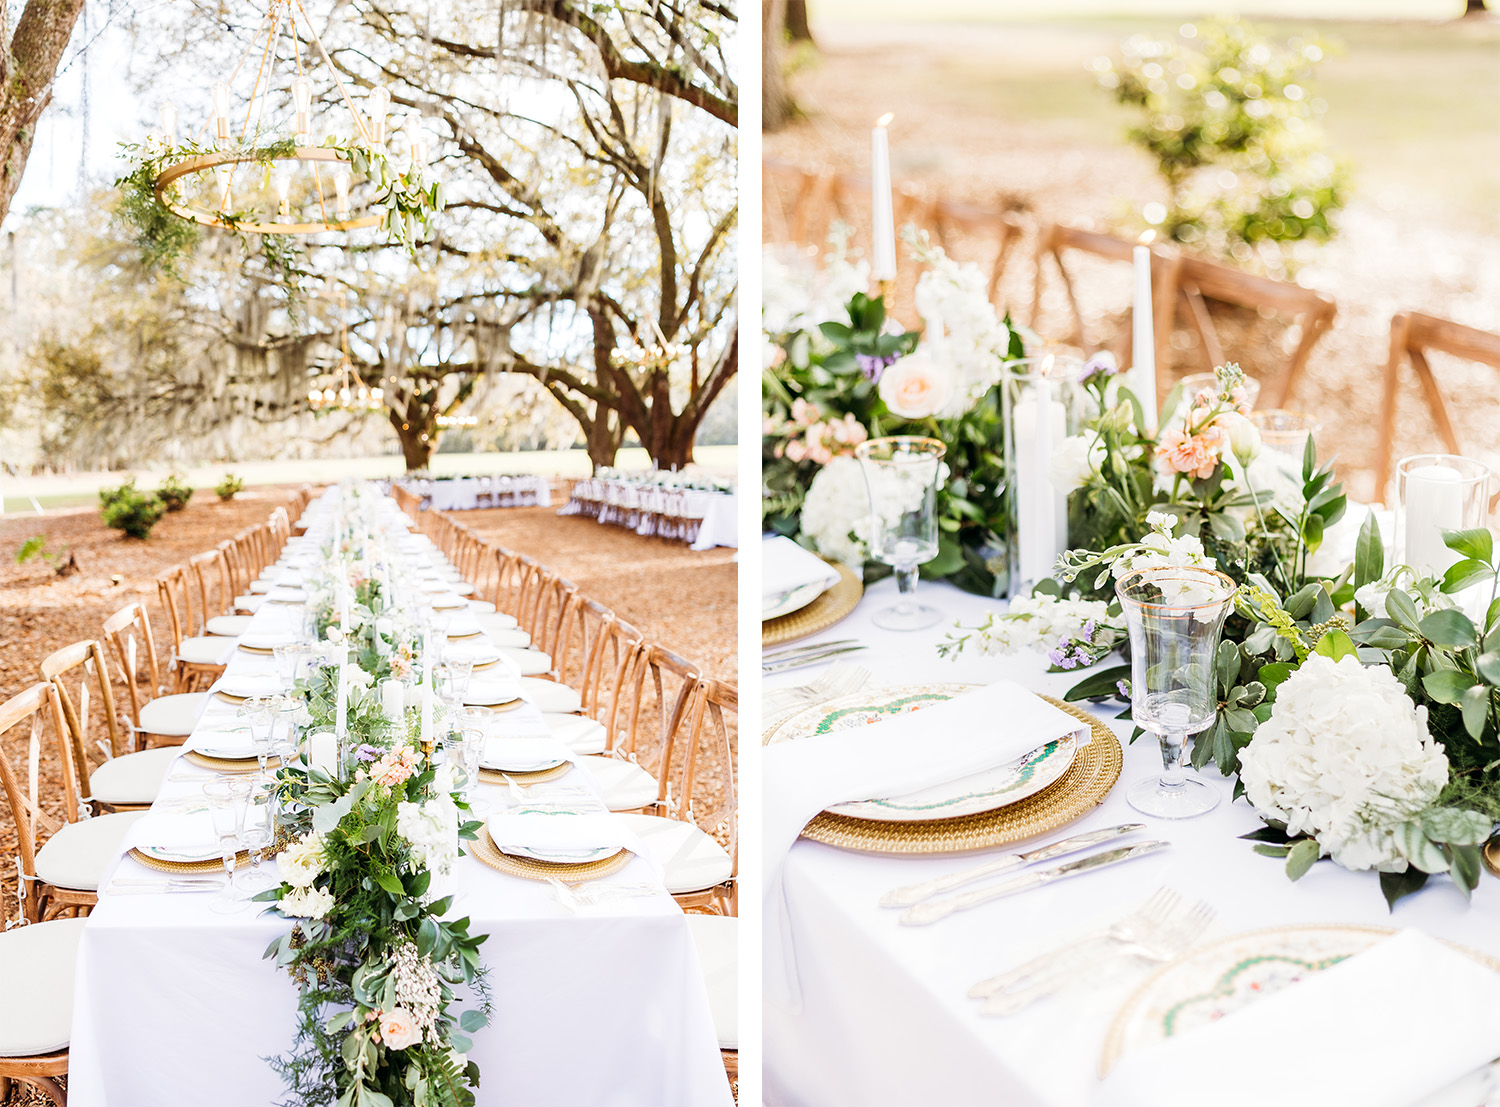 Outdoor setting with decorated table